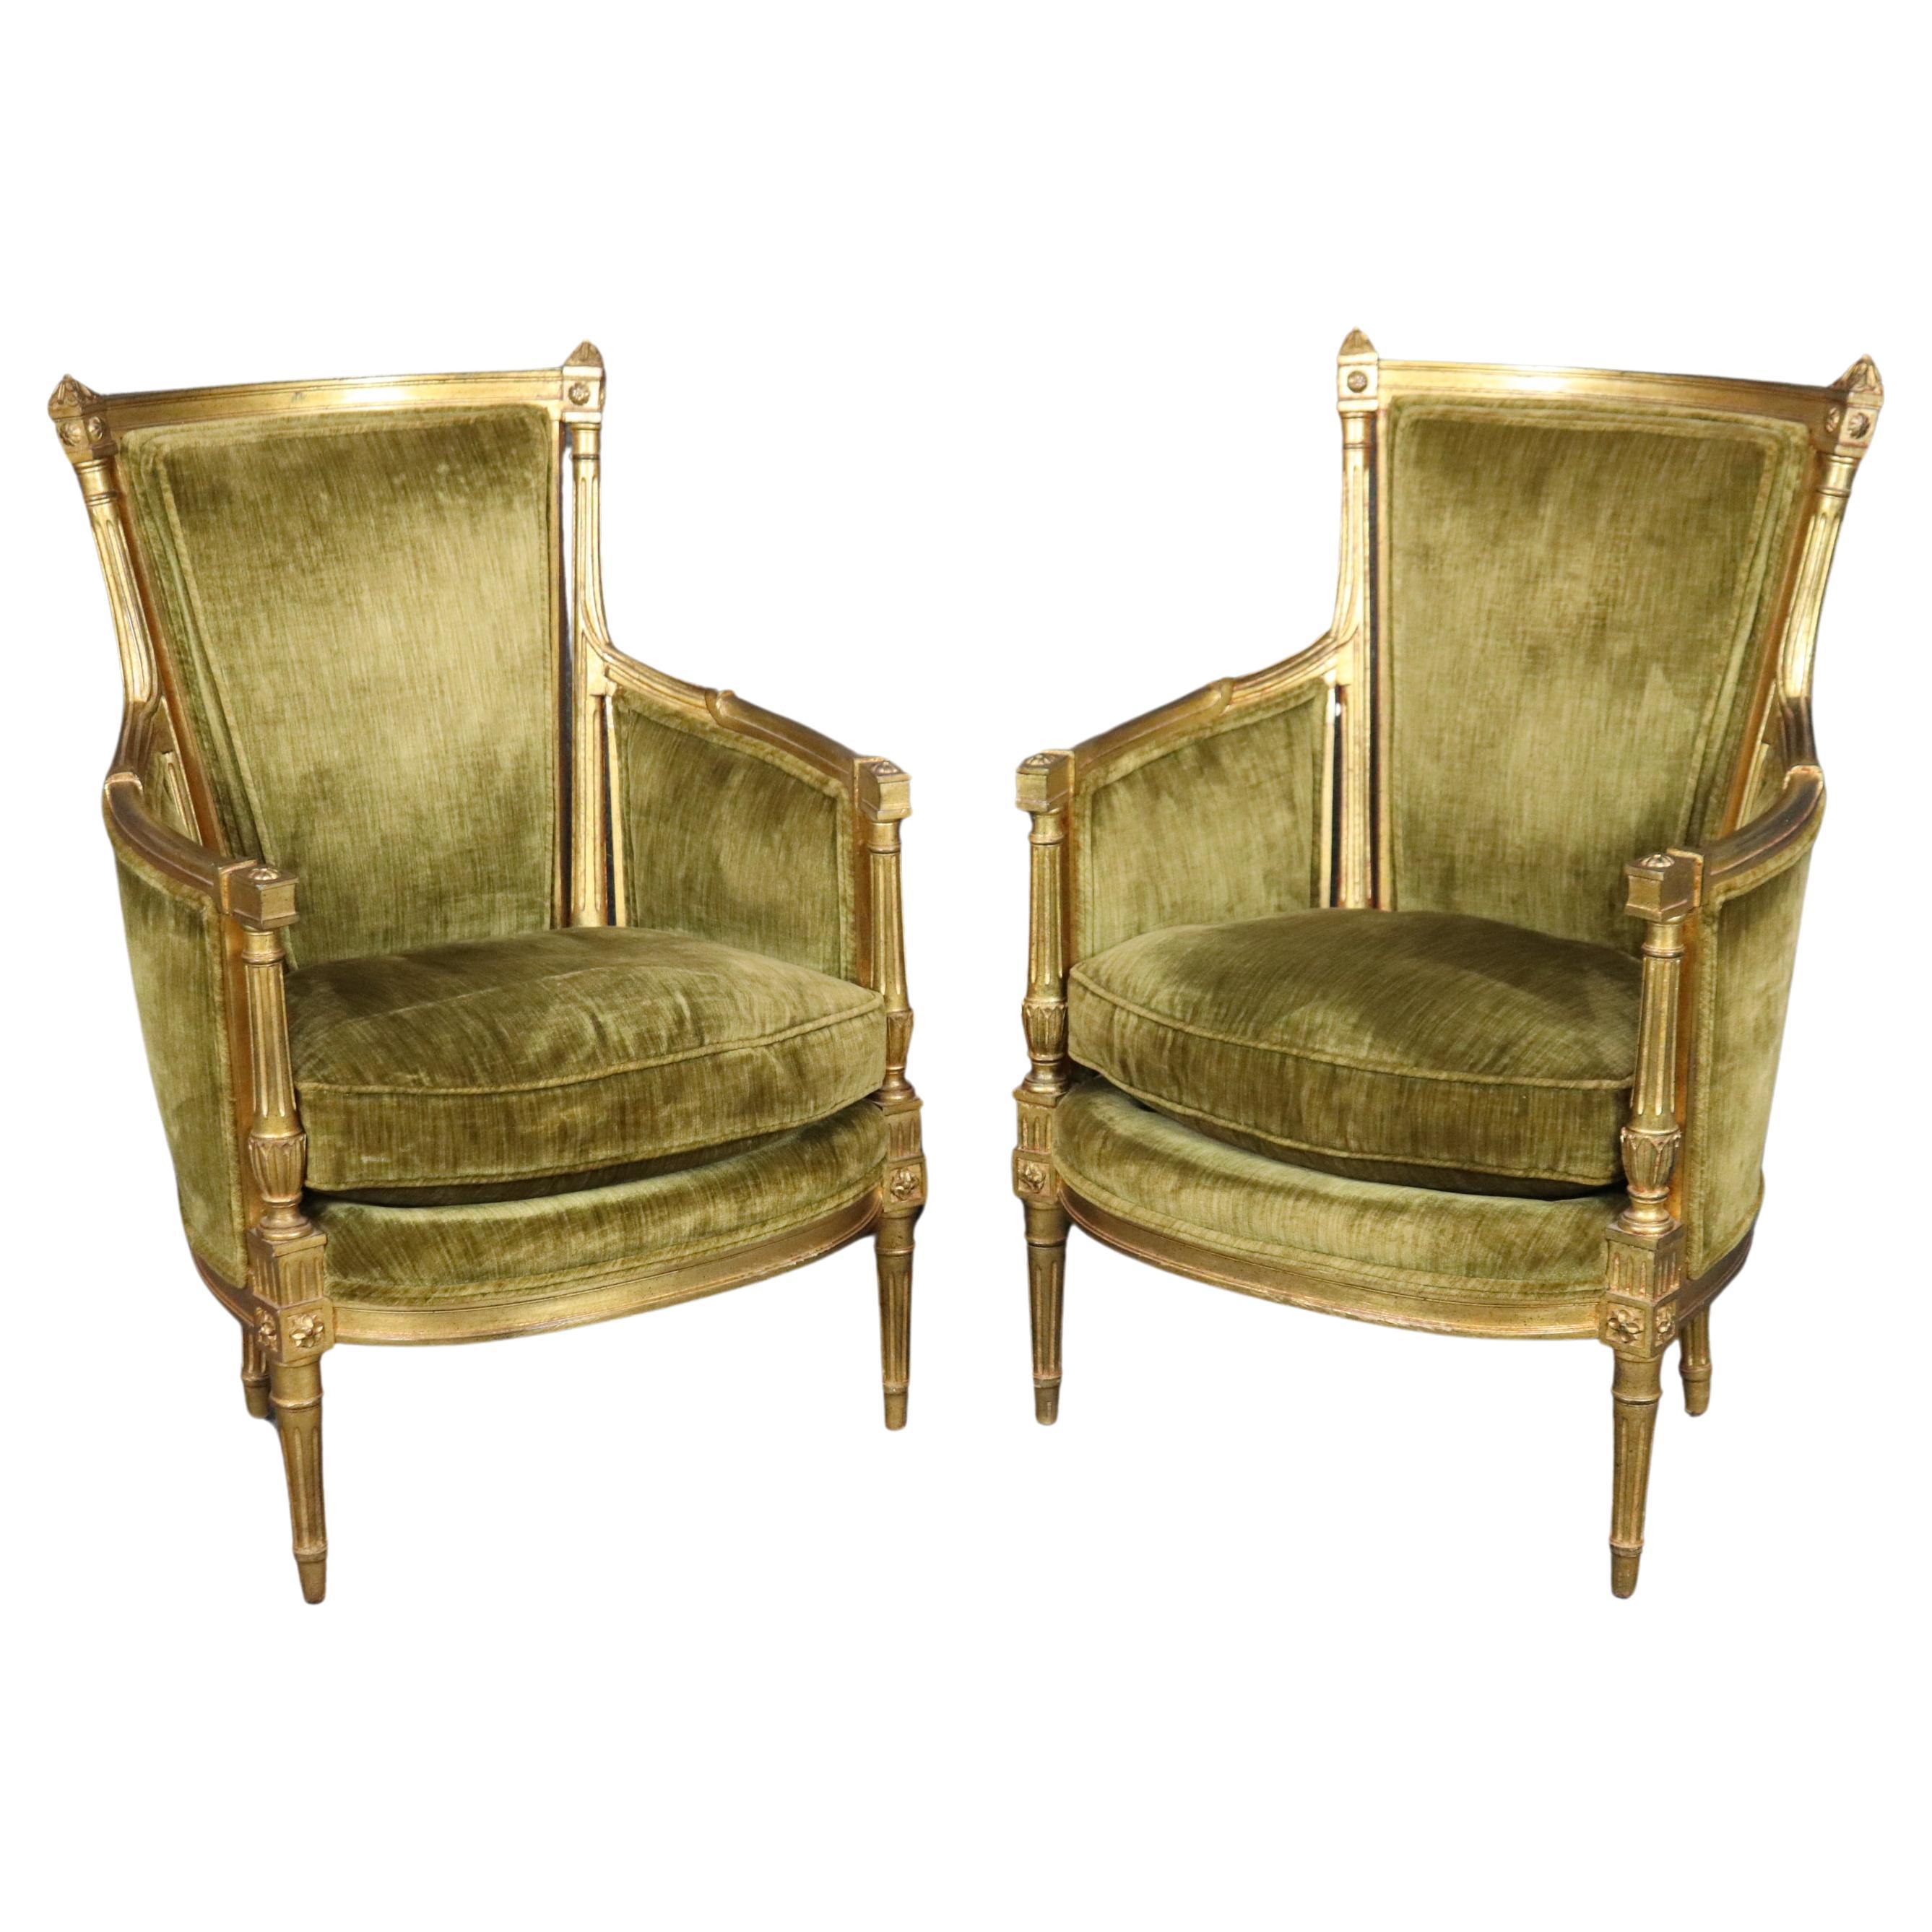 Pair of Smaller French Gilded Carved Directoire Bergere Chairs in Green Velvet